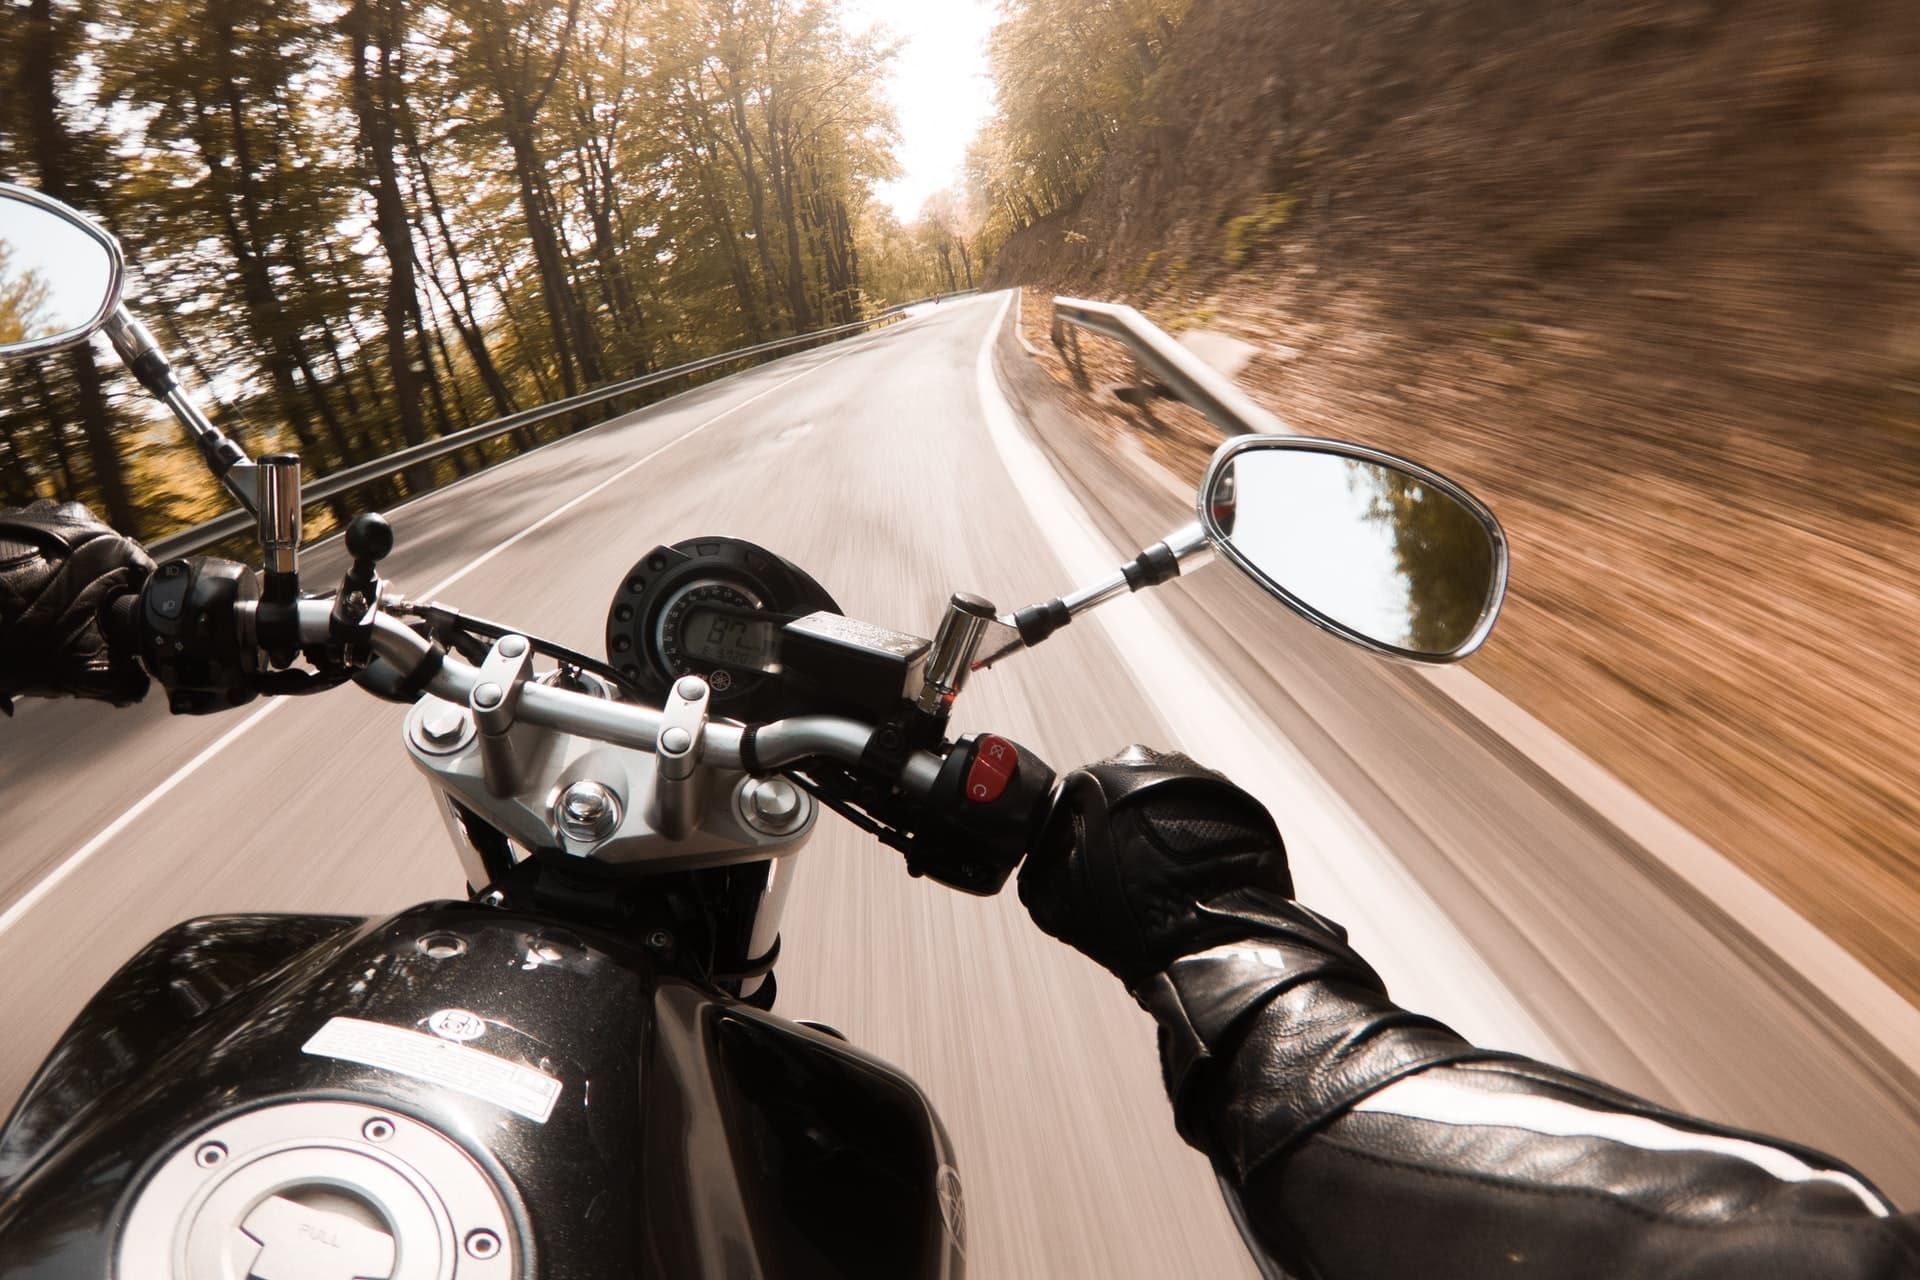 Motorcycle Accidents and Traumatic Brain Injury Risks